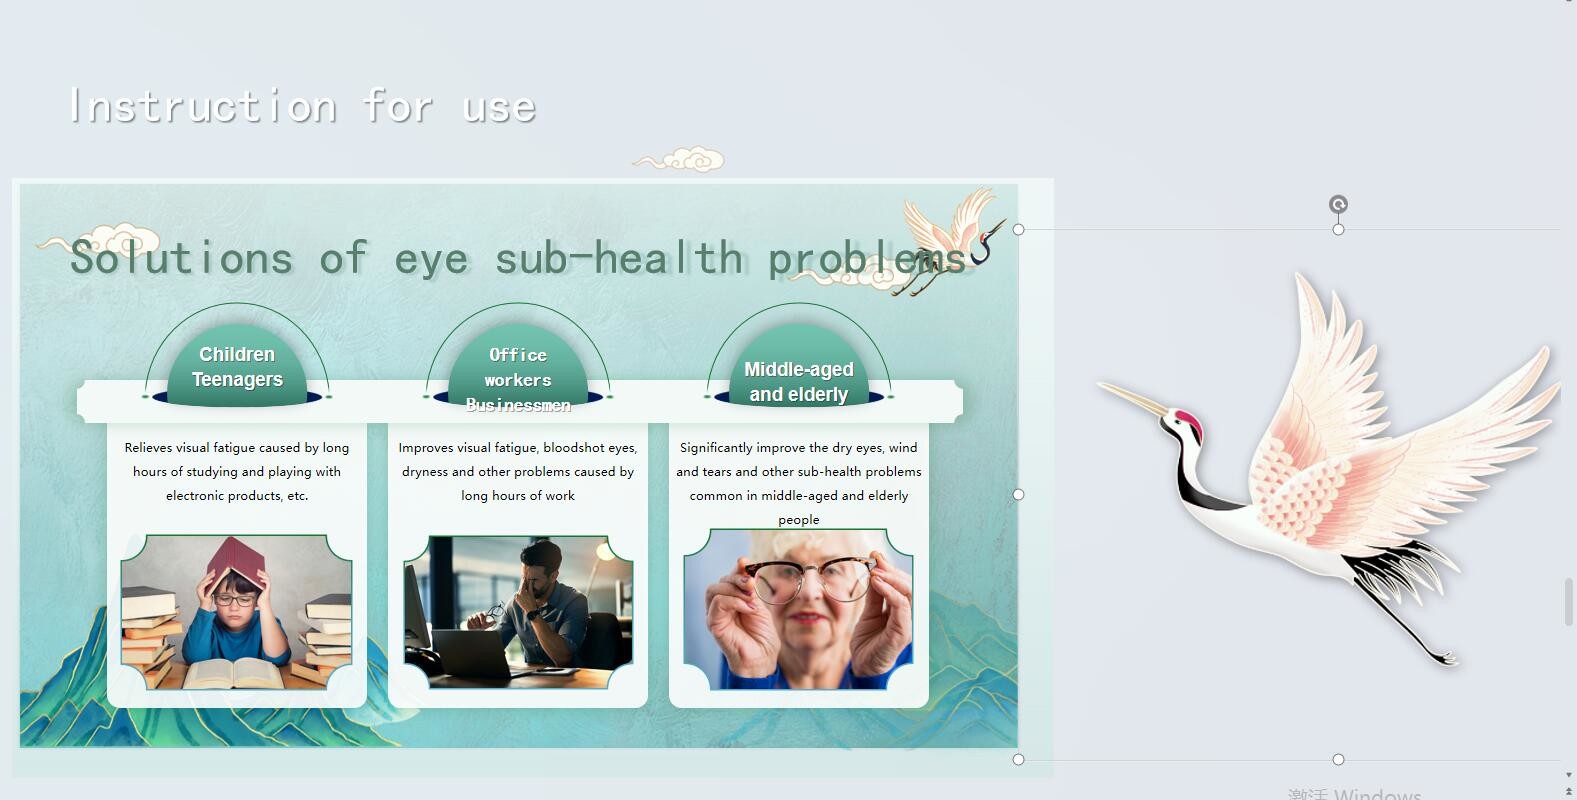 Kangtong Eye Massage and Care Cream Significantly improve the dry eyes, wind and tears and other sub-health problems com